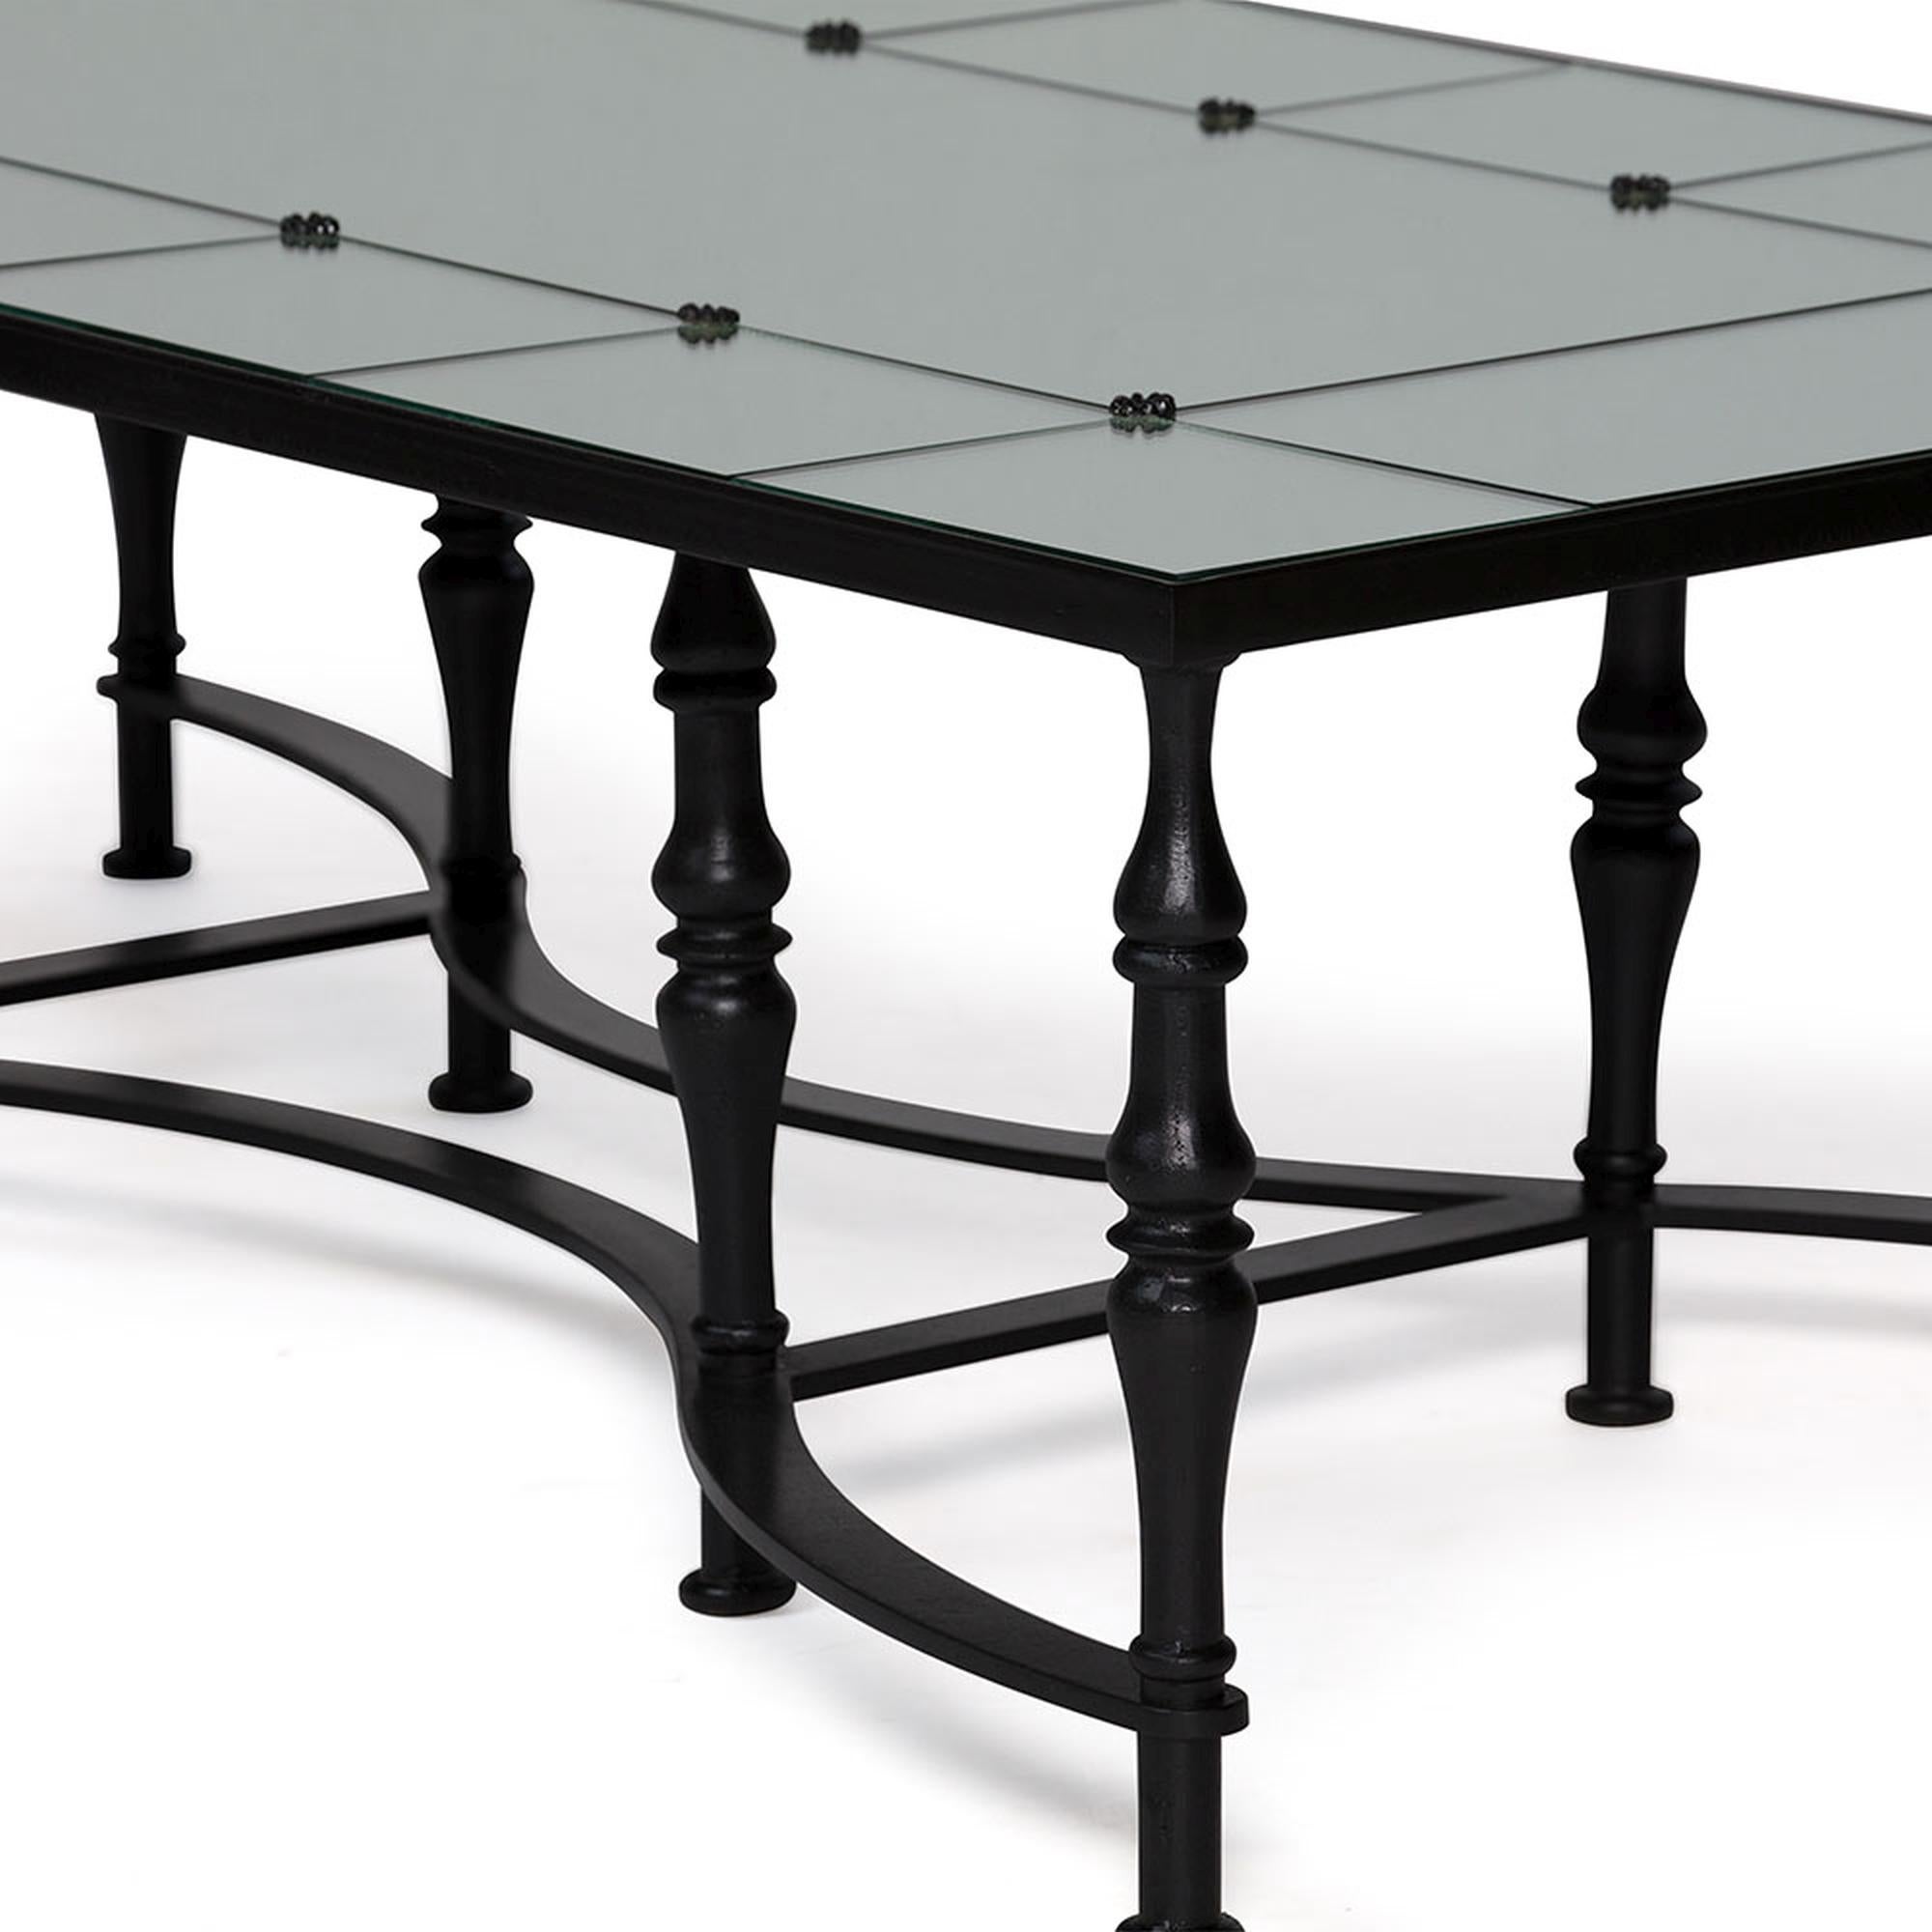 Providing an edge of sophistication and detail, the Astaire coffee table features a mirrored top and is accented with ebony metal rosettes and a flawless shape. The turned metal legs and mirrored effect offer a dramatic look while maintaining a